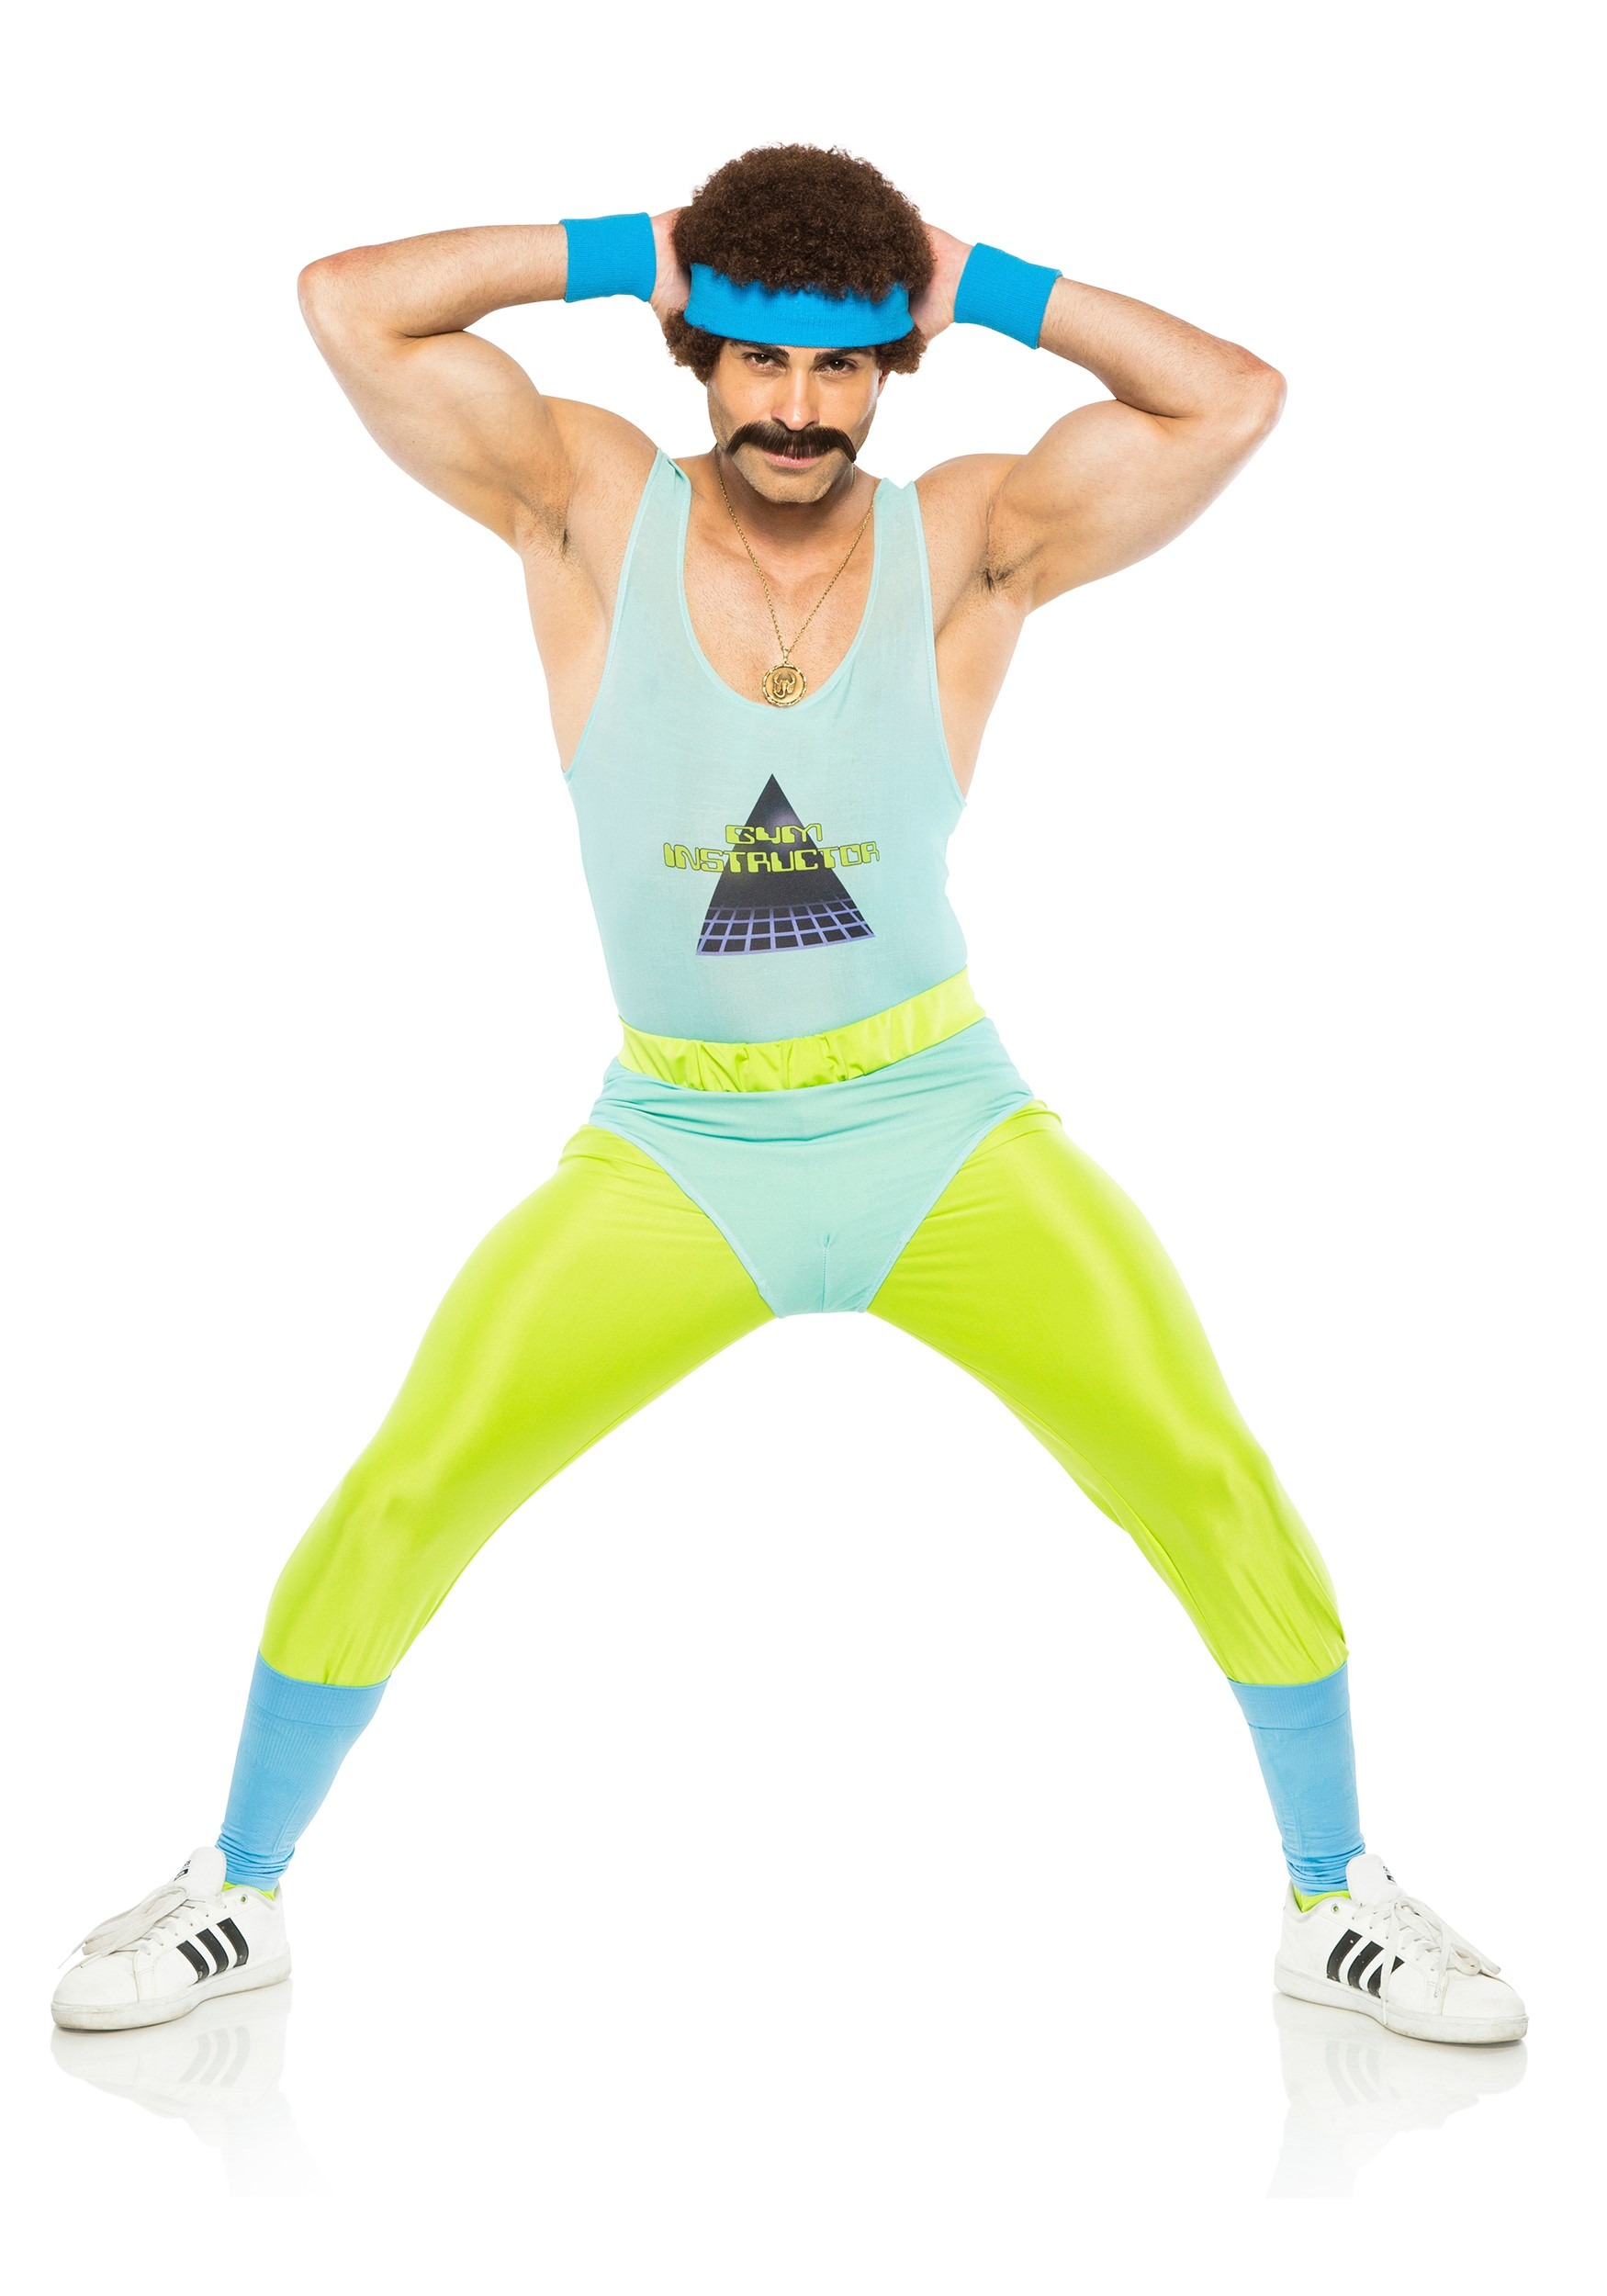 Mens 80 S Gym Instructor Costume Adults 80s costume mens ladies shell suit aerobics tracksuit fancy dress outfit. men s 80 s gym instructor costume